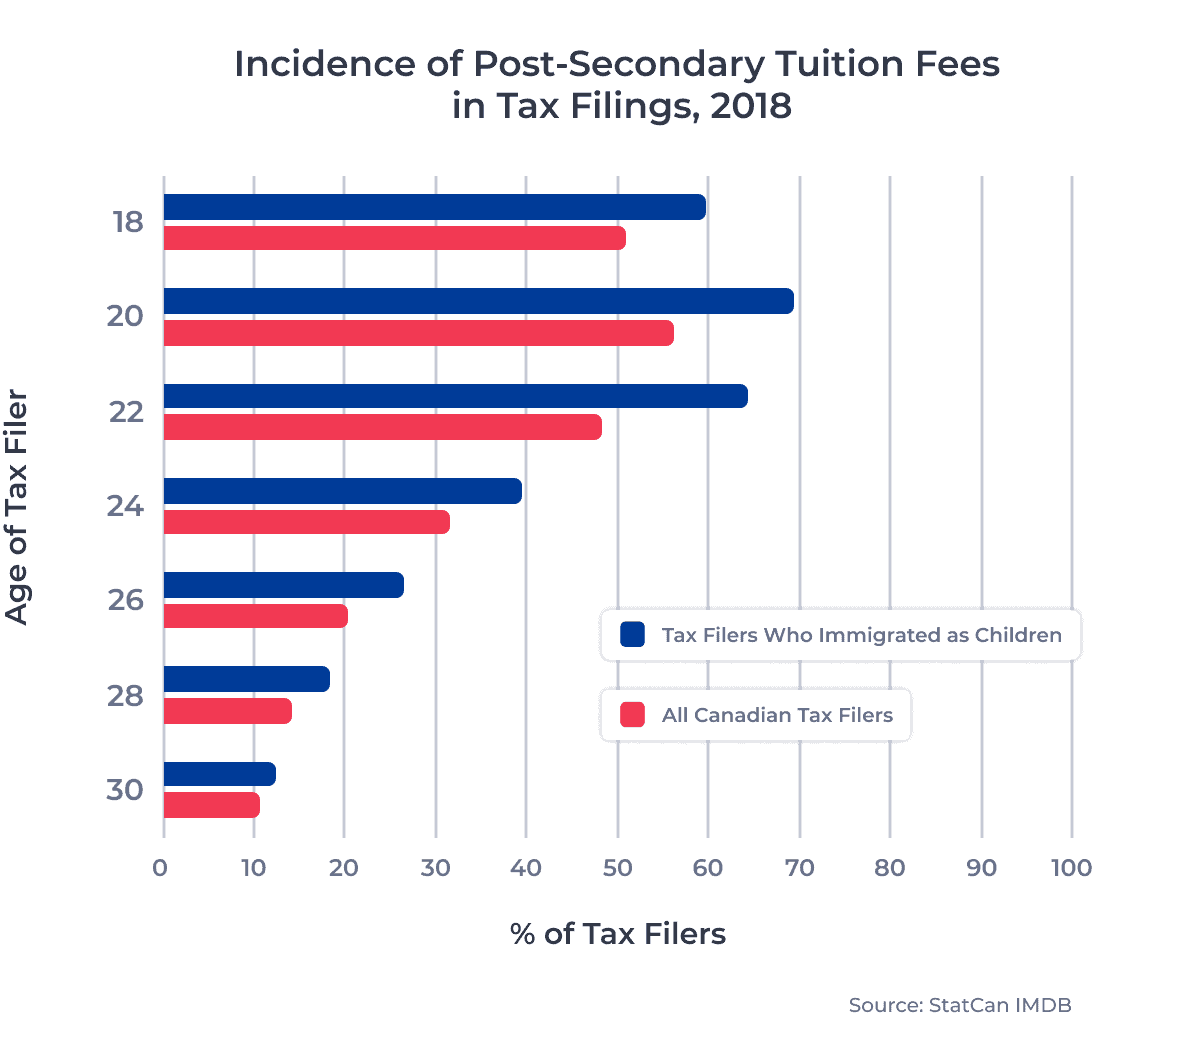 Incidence of Post-Secondary Tuition Fees in Tax Filings, 2018